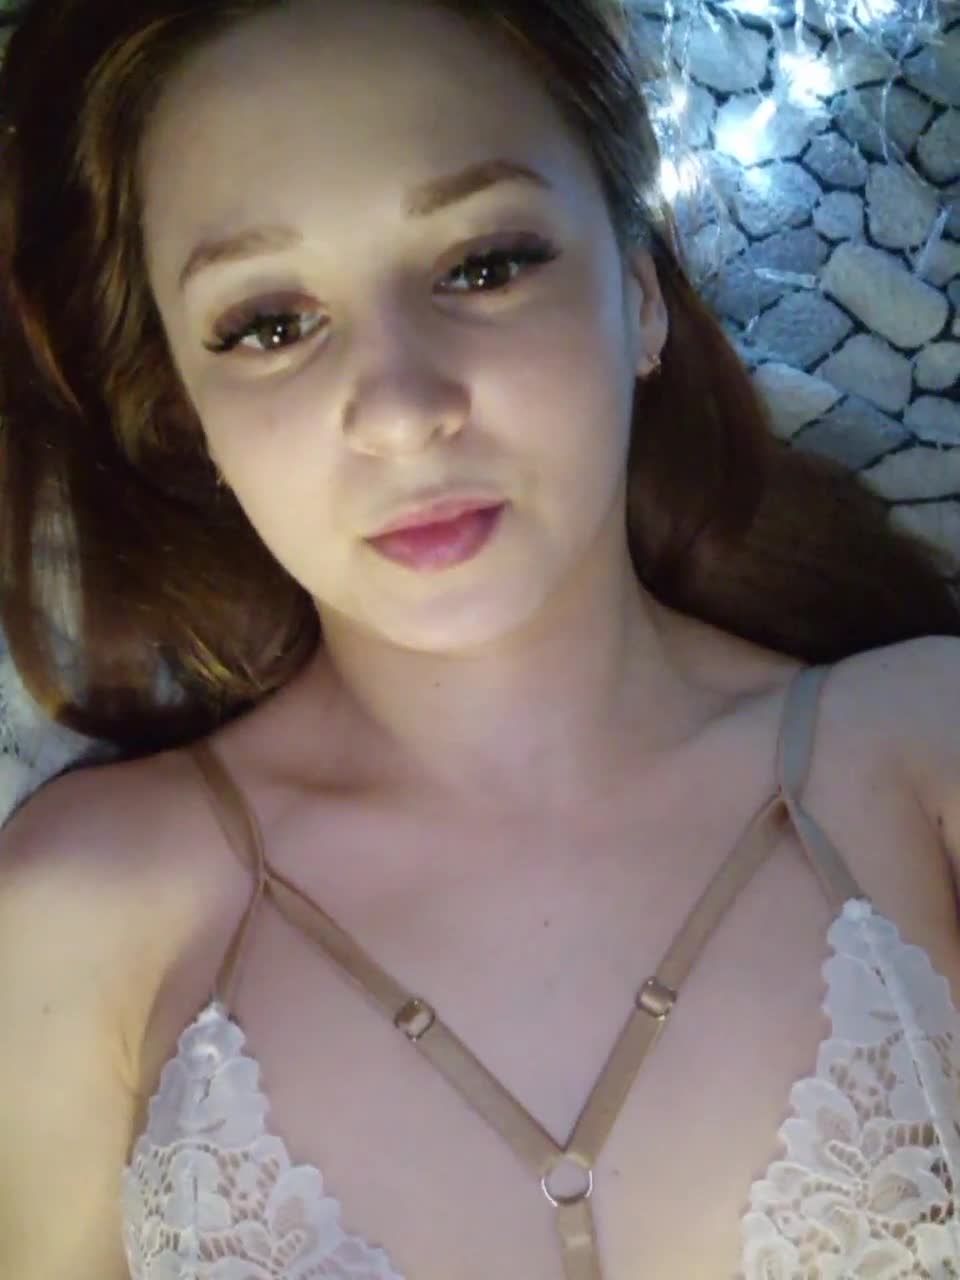 View or download file blackchery753 on 2023-01-19 from bongacams